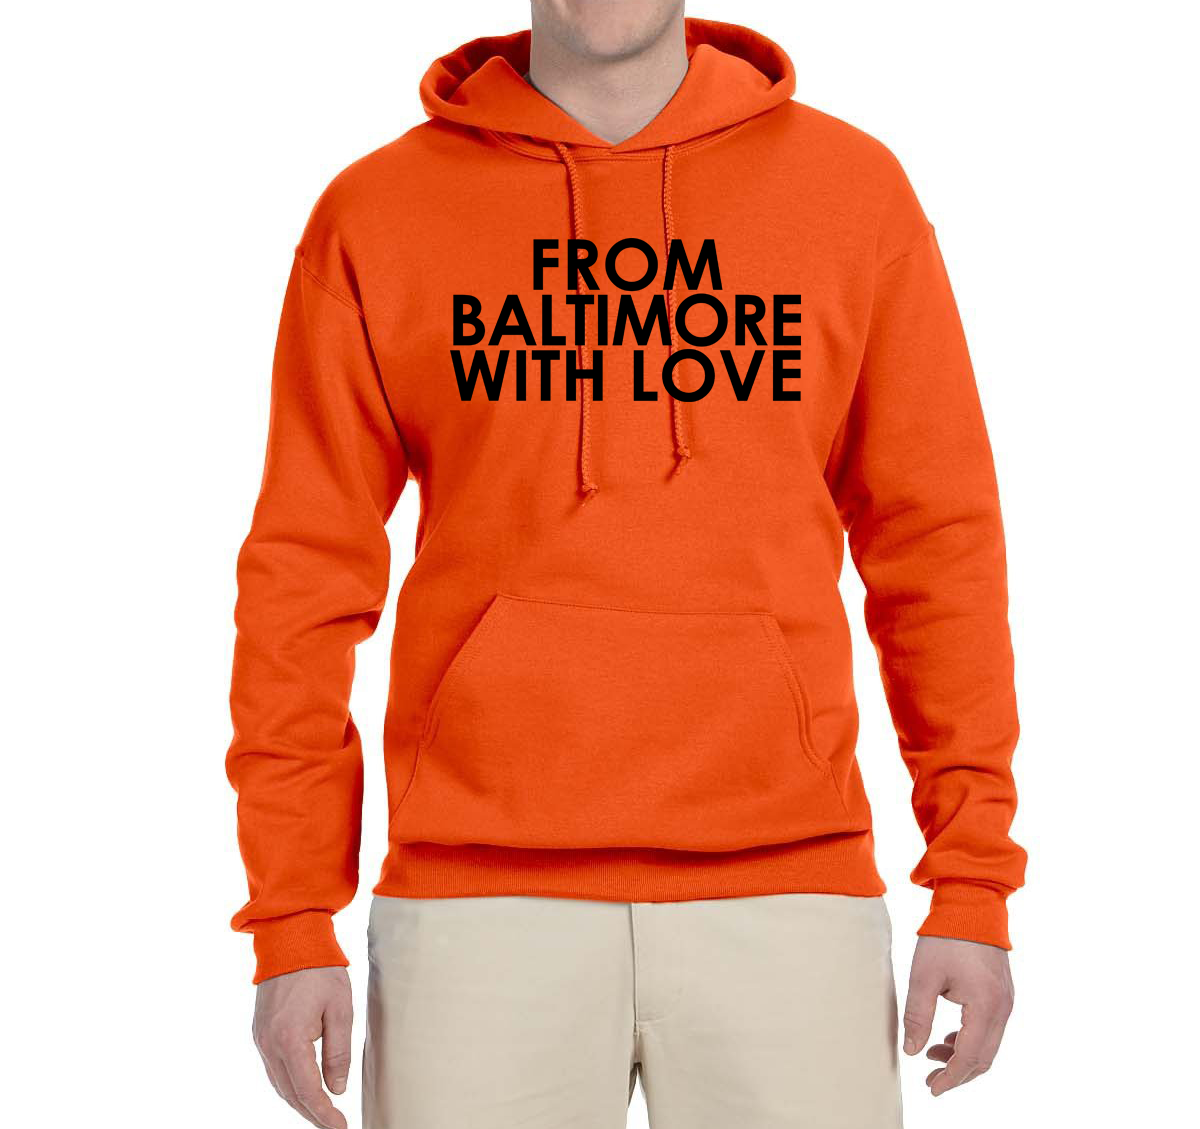 FROM BALTIMORE WITH LOVE “Lets Go!” Orange HOODIE